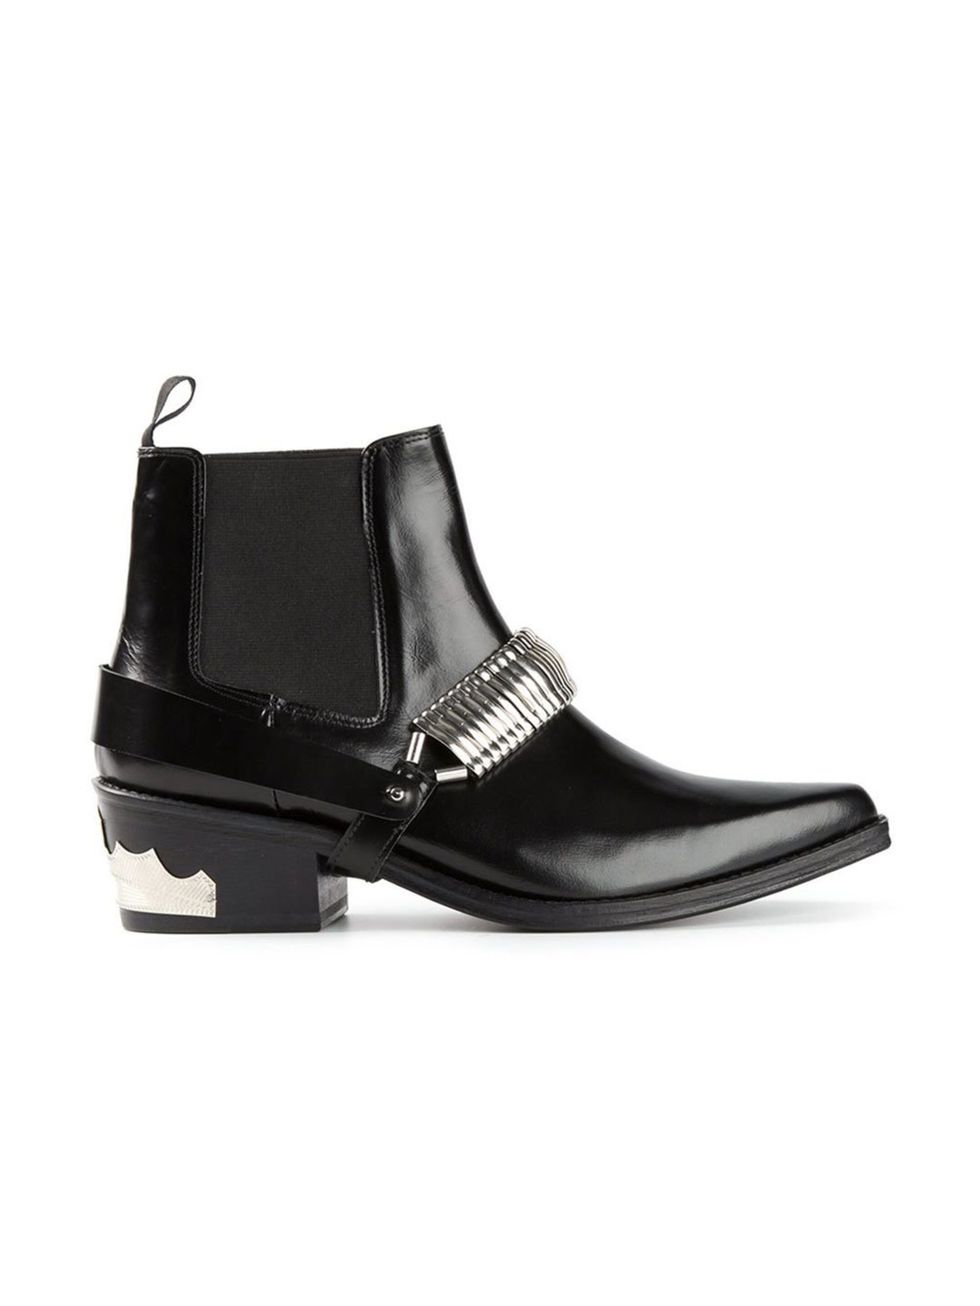 Shoe, White, Boot, Leather, Black, Grey, Synthetic rubber, Dress shoe, Fashion design, Work boots, 